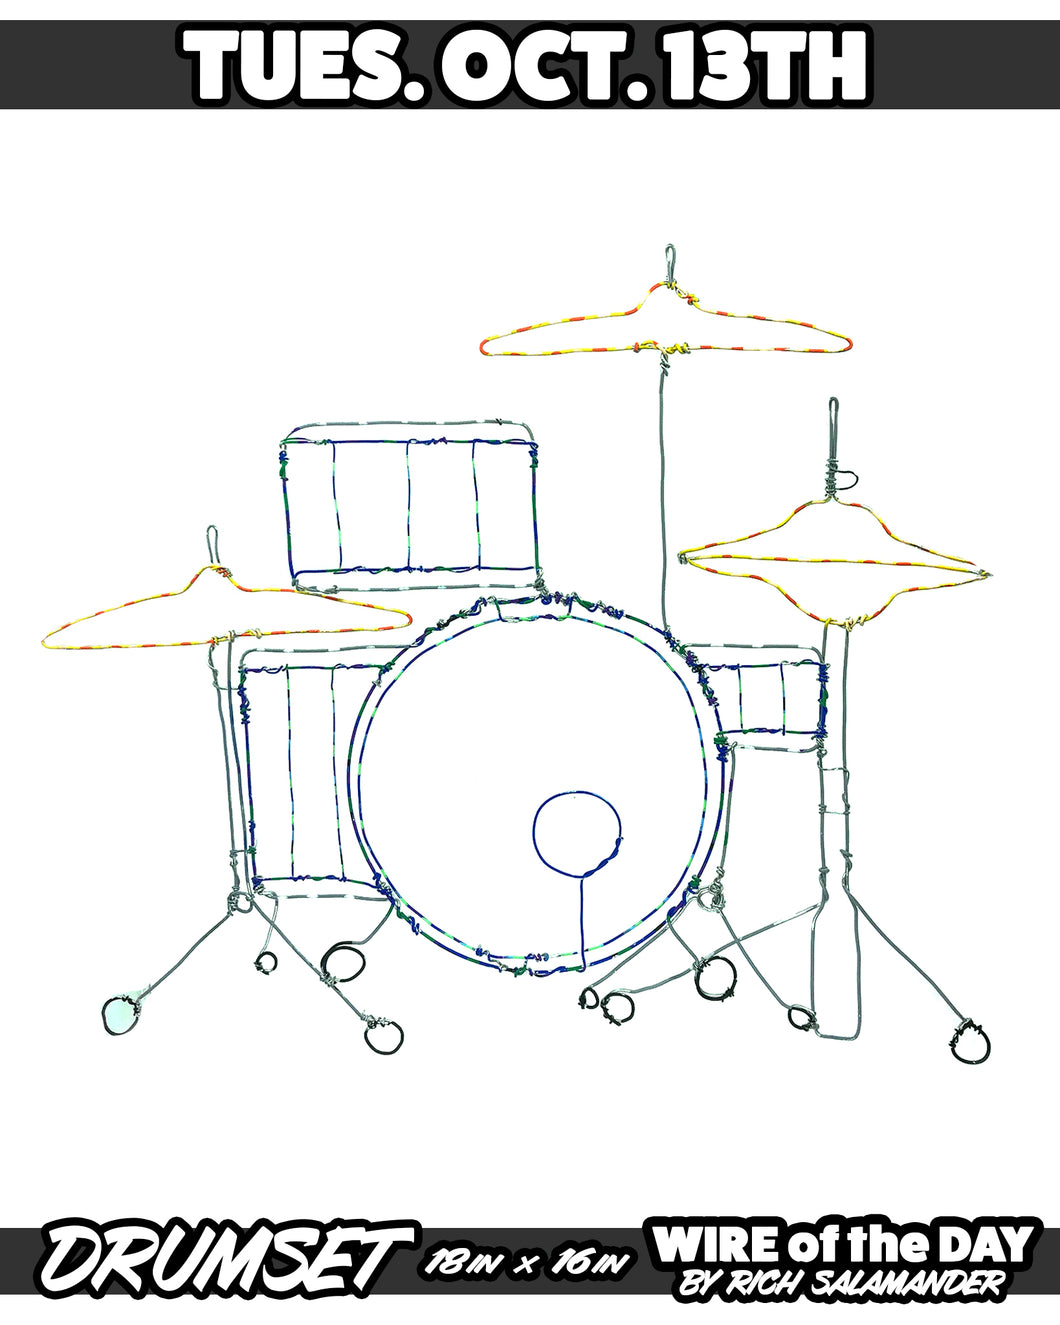 WIRE of the DAY DRUMSET